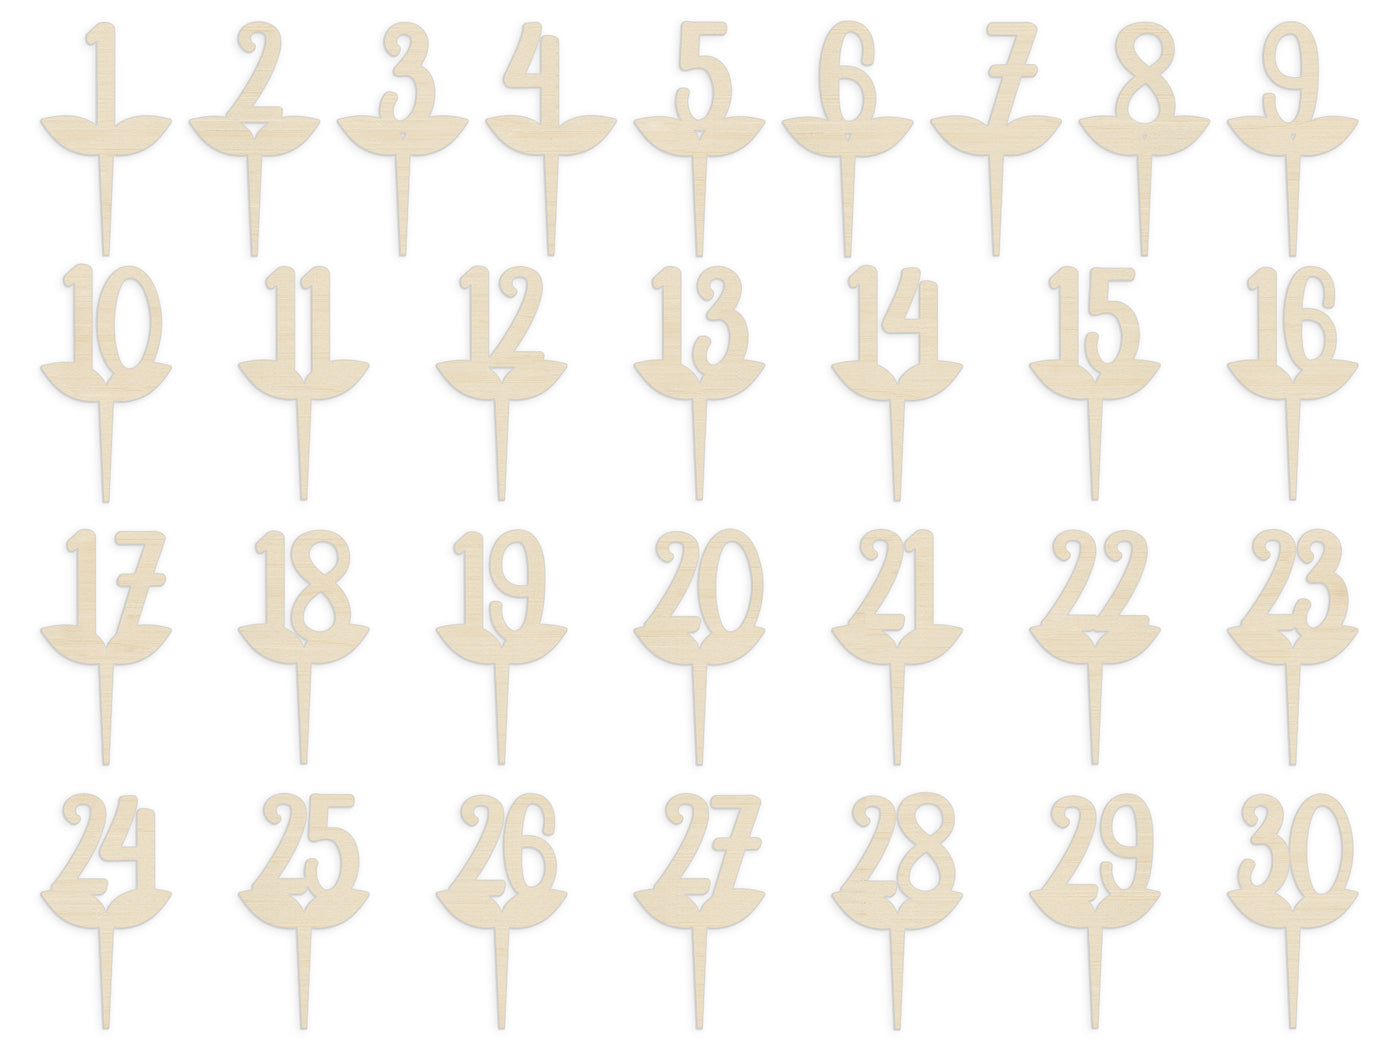 Sweety - Table numbers - Restaurant and Wedding wood table numbers